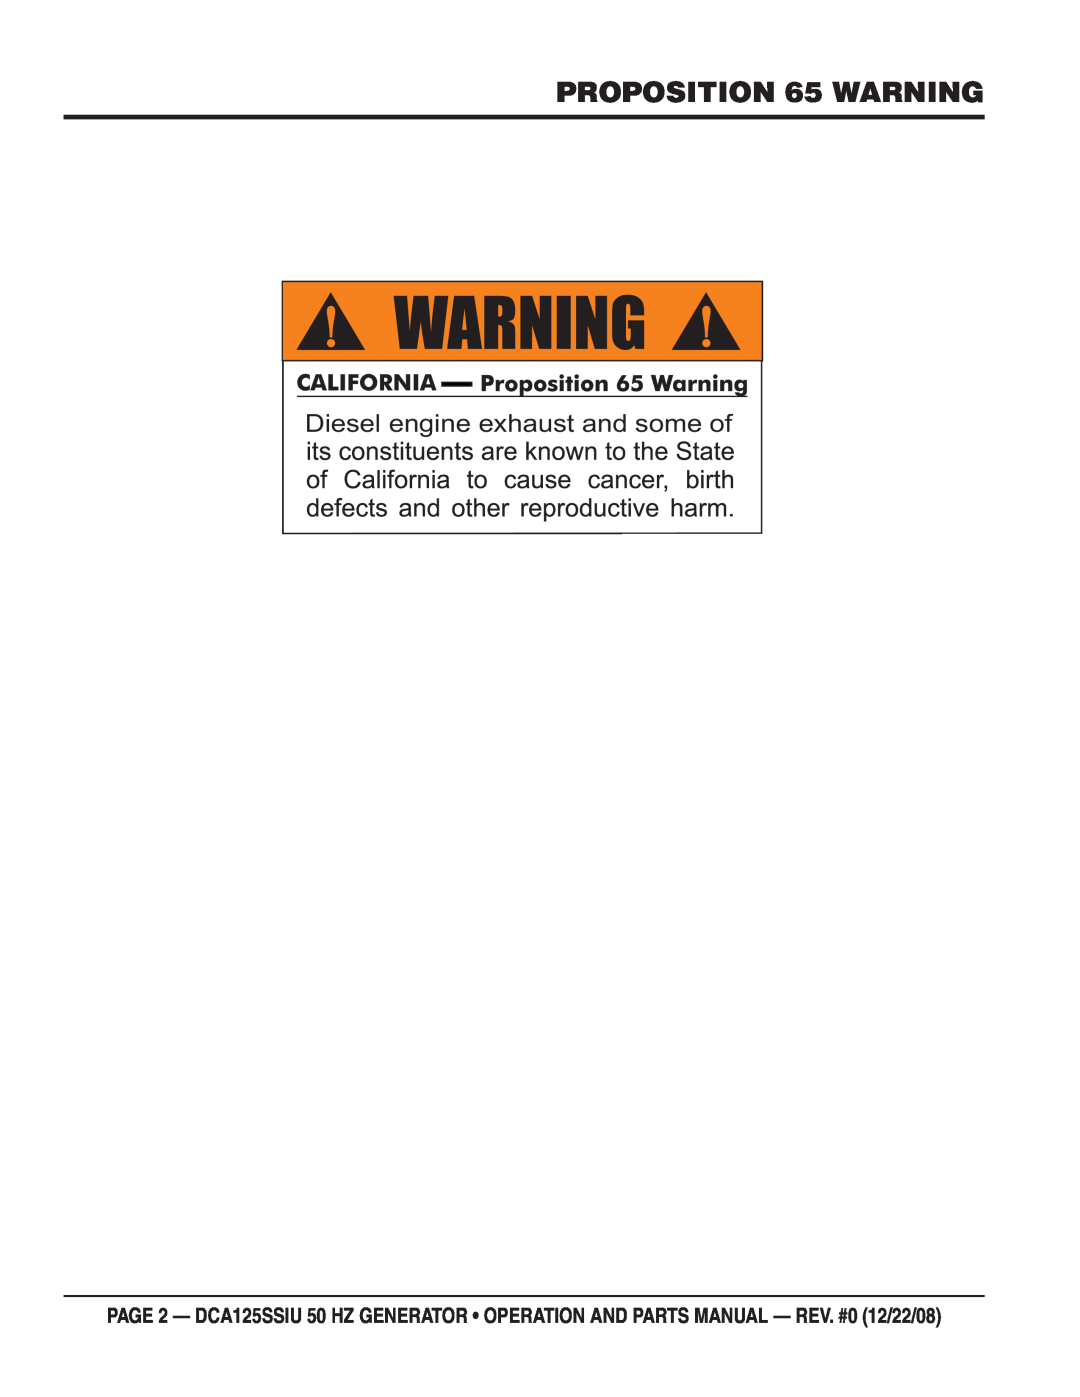 Multiquip DCA125SSIU manual PROPOSITION 65 WARNING, Diesel engine exhaust and some of 